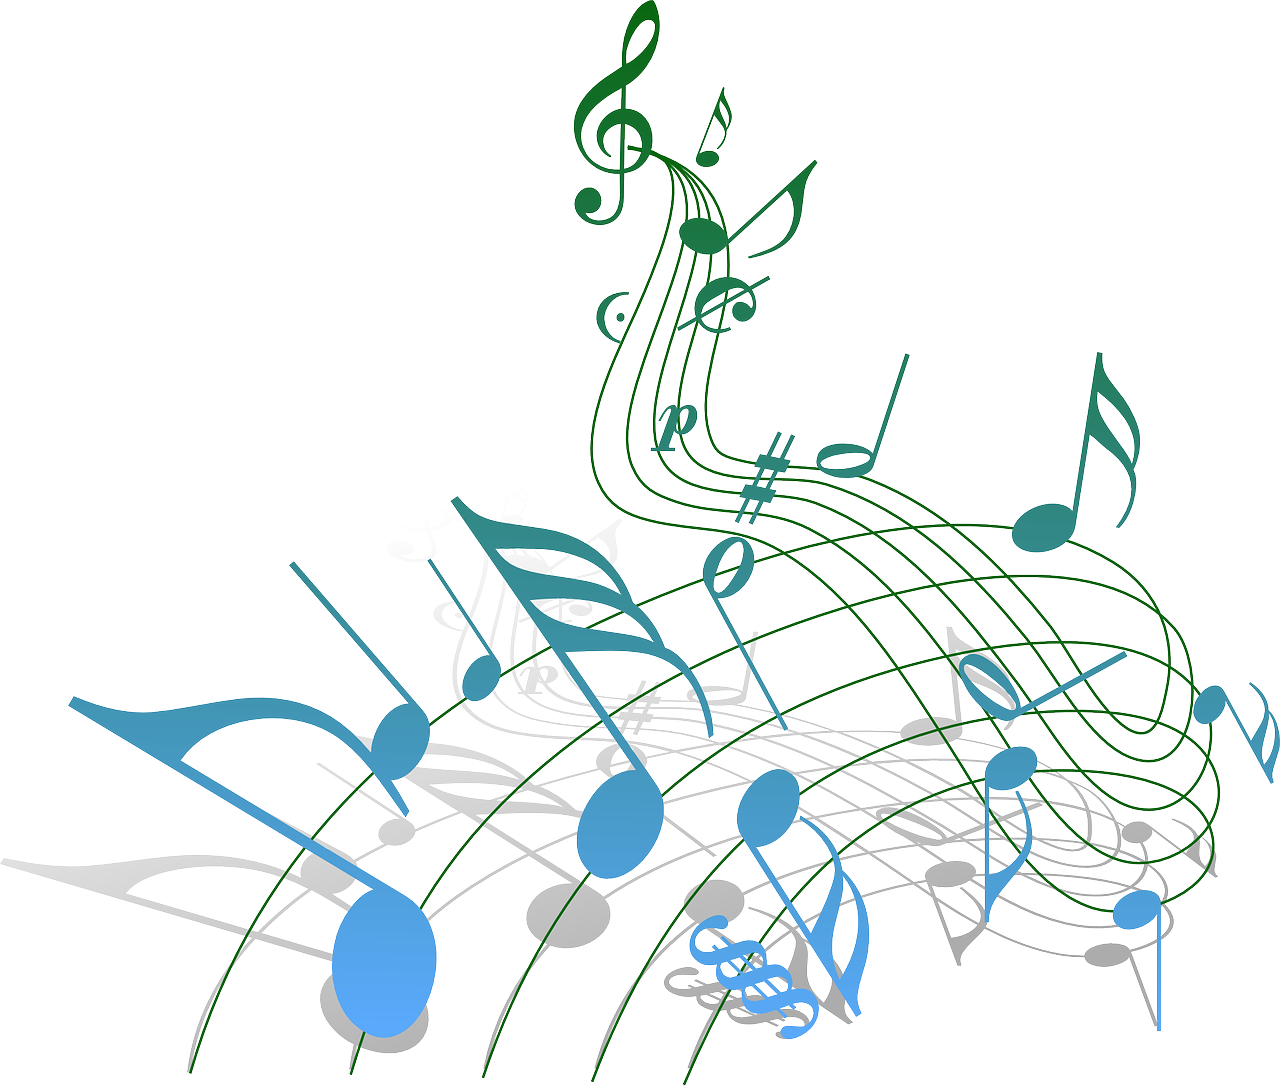 Image of music notes swirling from the bottom to the top of the image border. The notes at the bottom are blue, and curve away to turn green at the top.